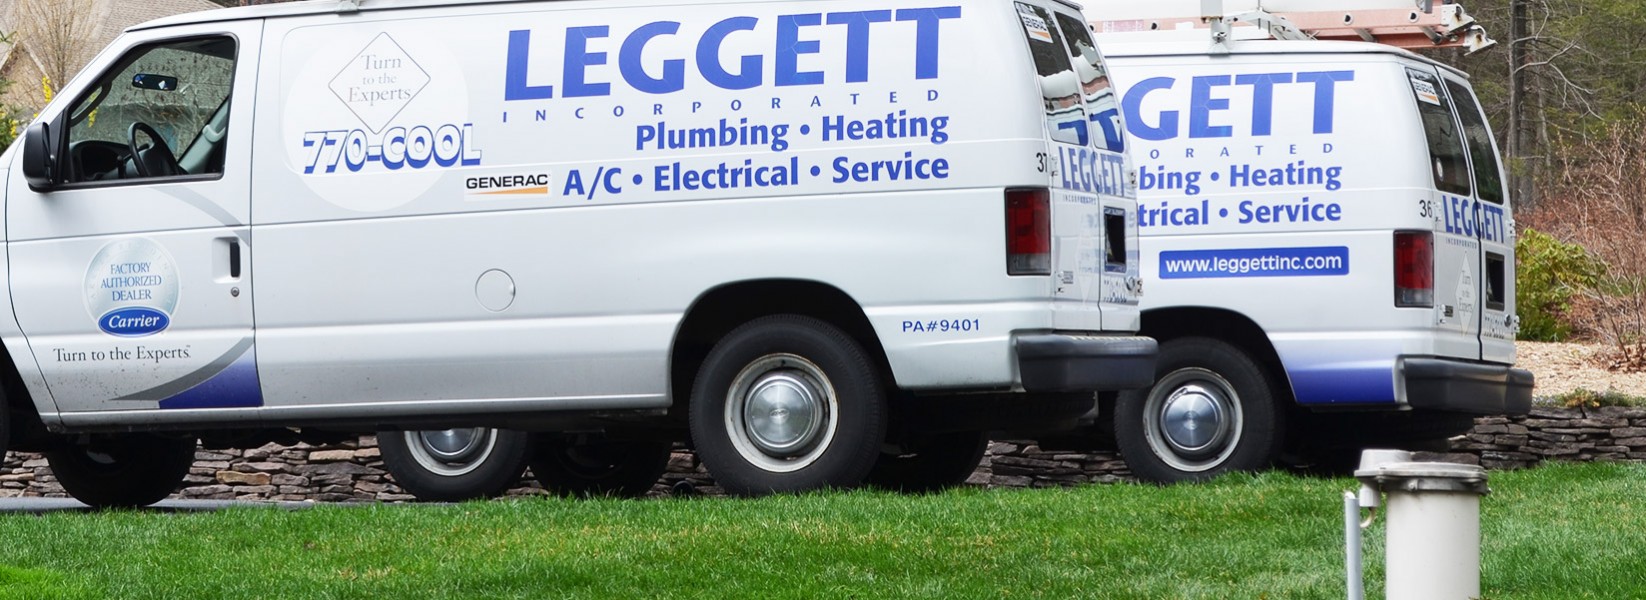 leggett inc industries served both residential and commercial hvac services